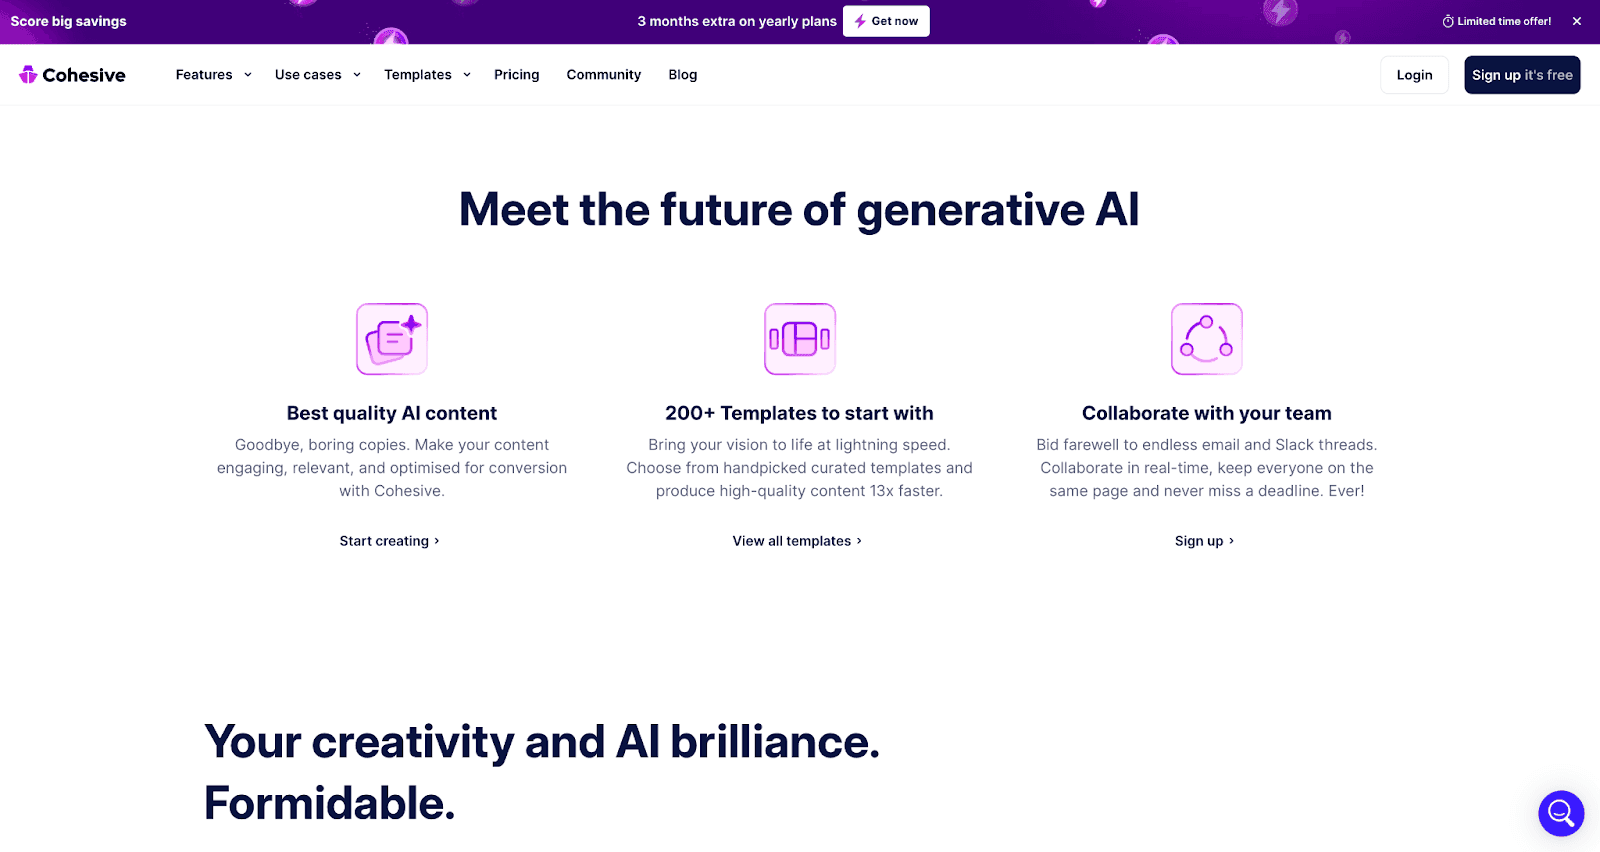 Cohesive - Meet the future of generative AI. Your creativity and AI brilliance. Formidable.